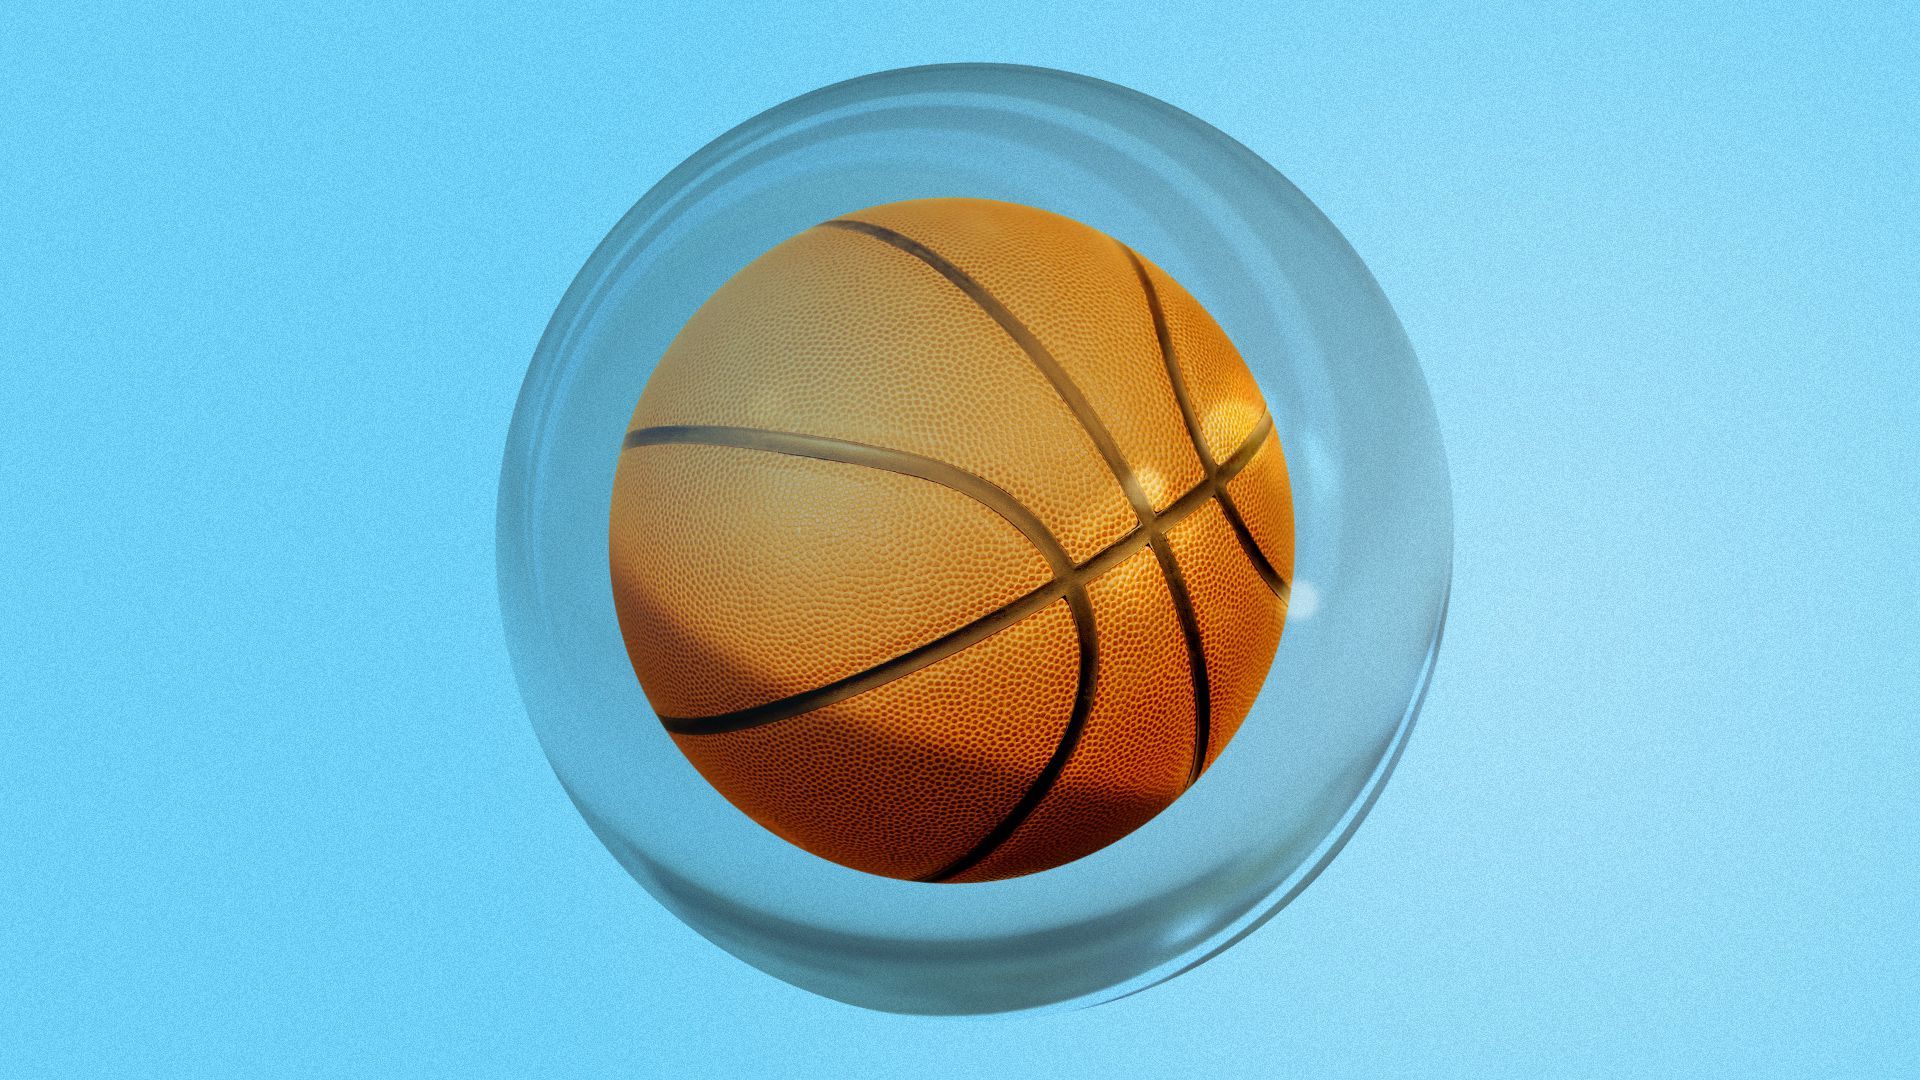 Illustration of a basketball in a bubble